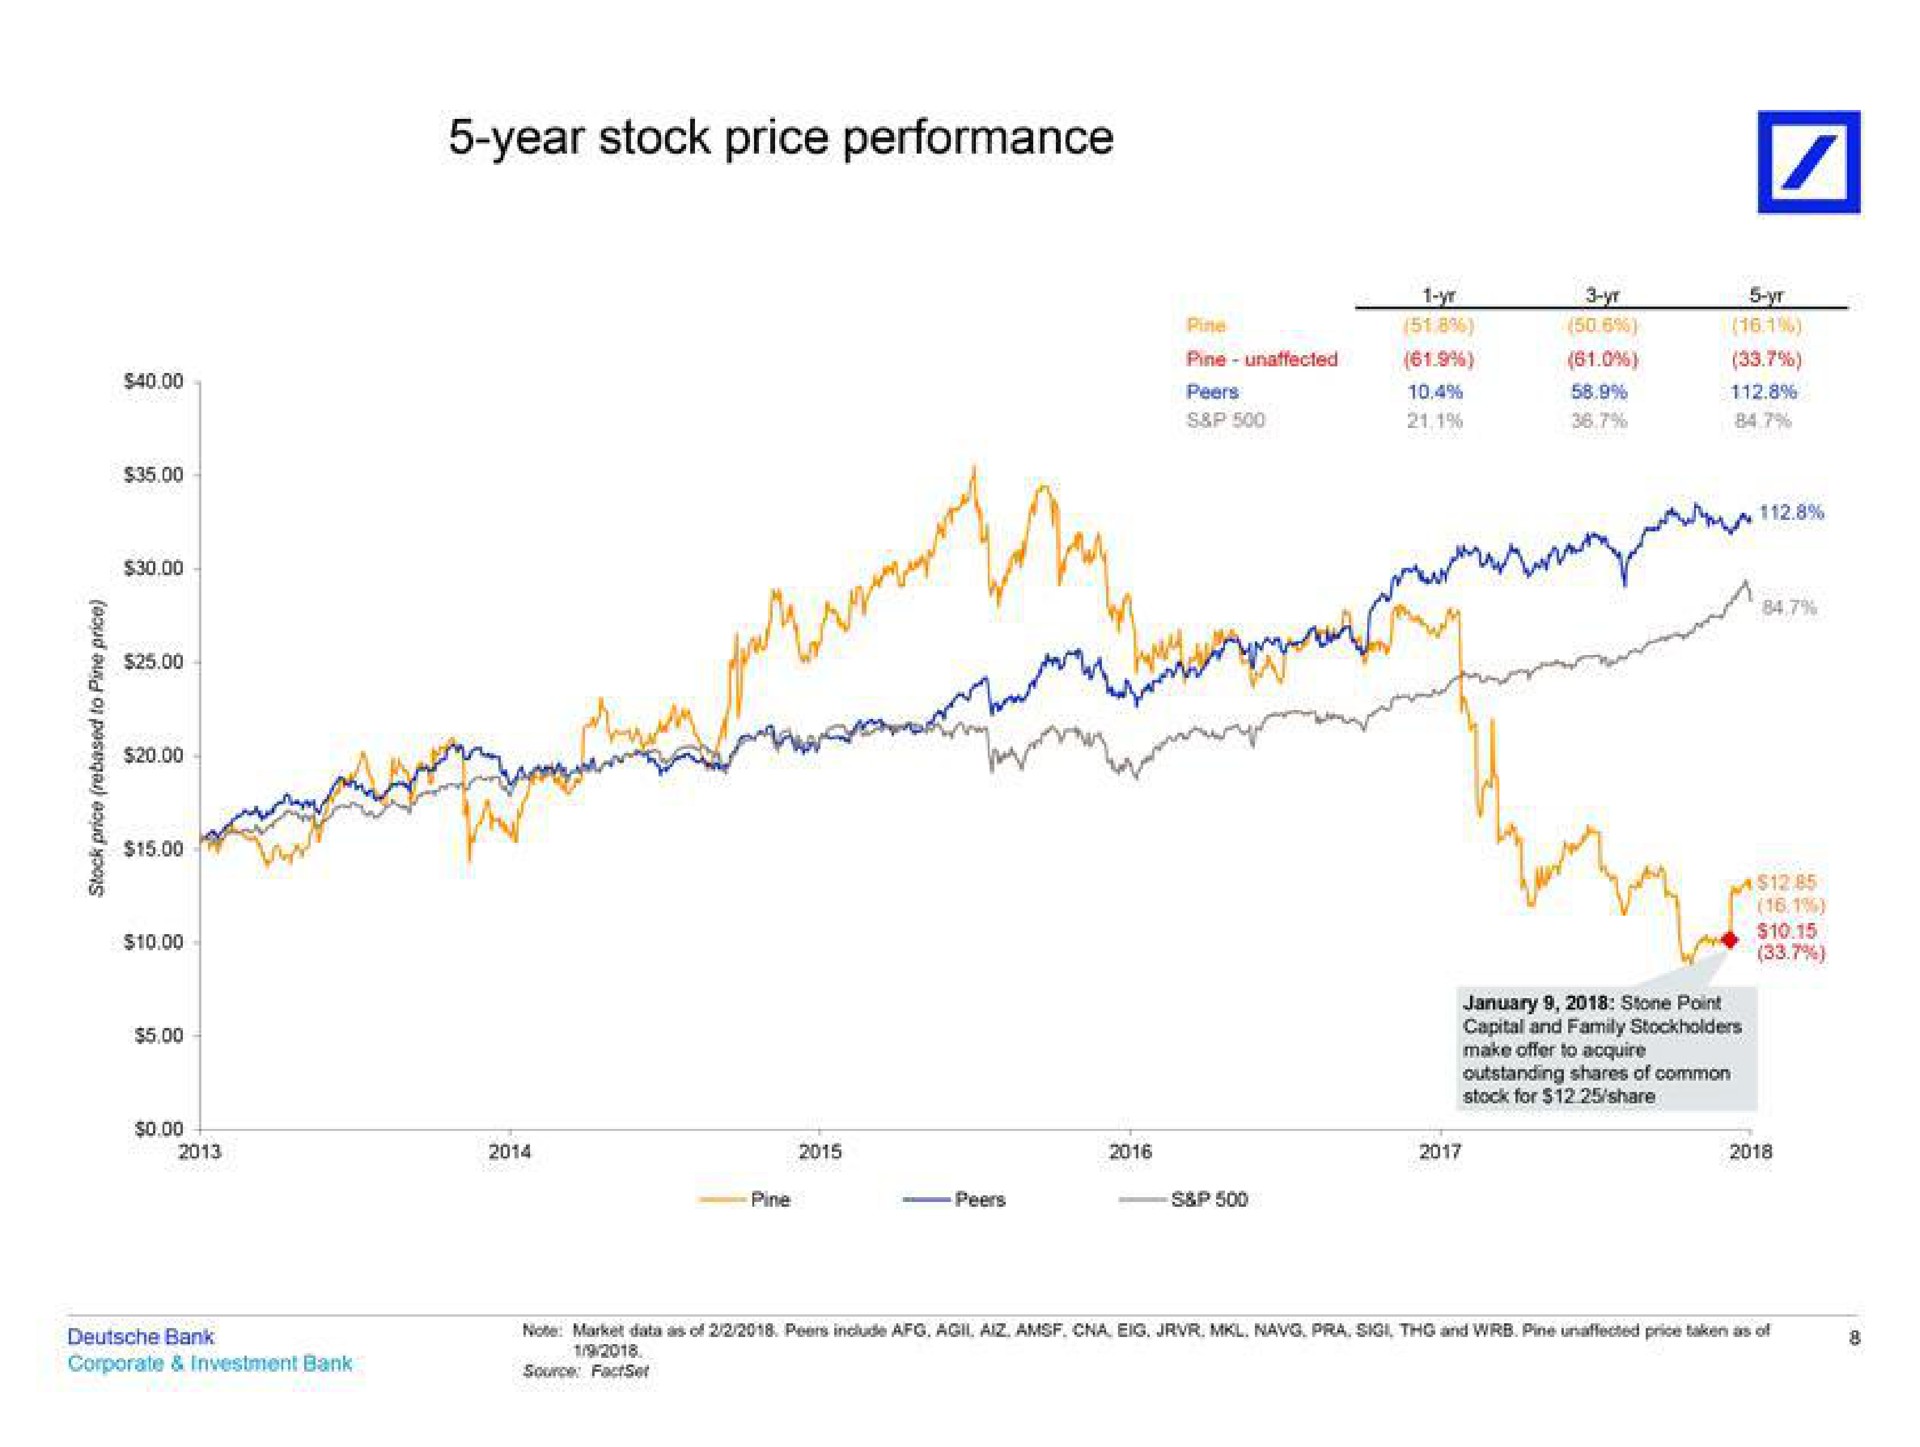 year stock price performance lay nea corporate investment bank siege pated | Deutsche Bank